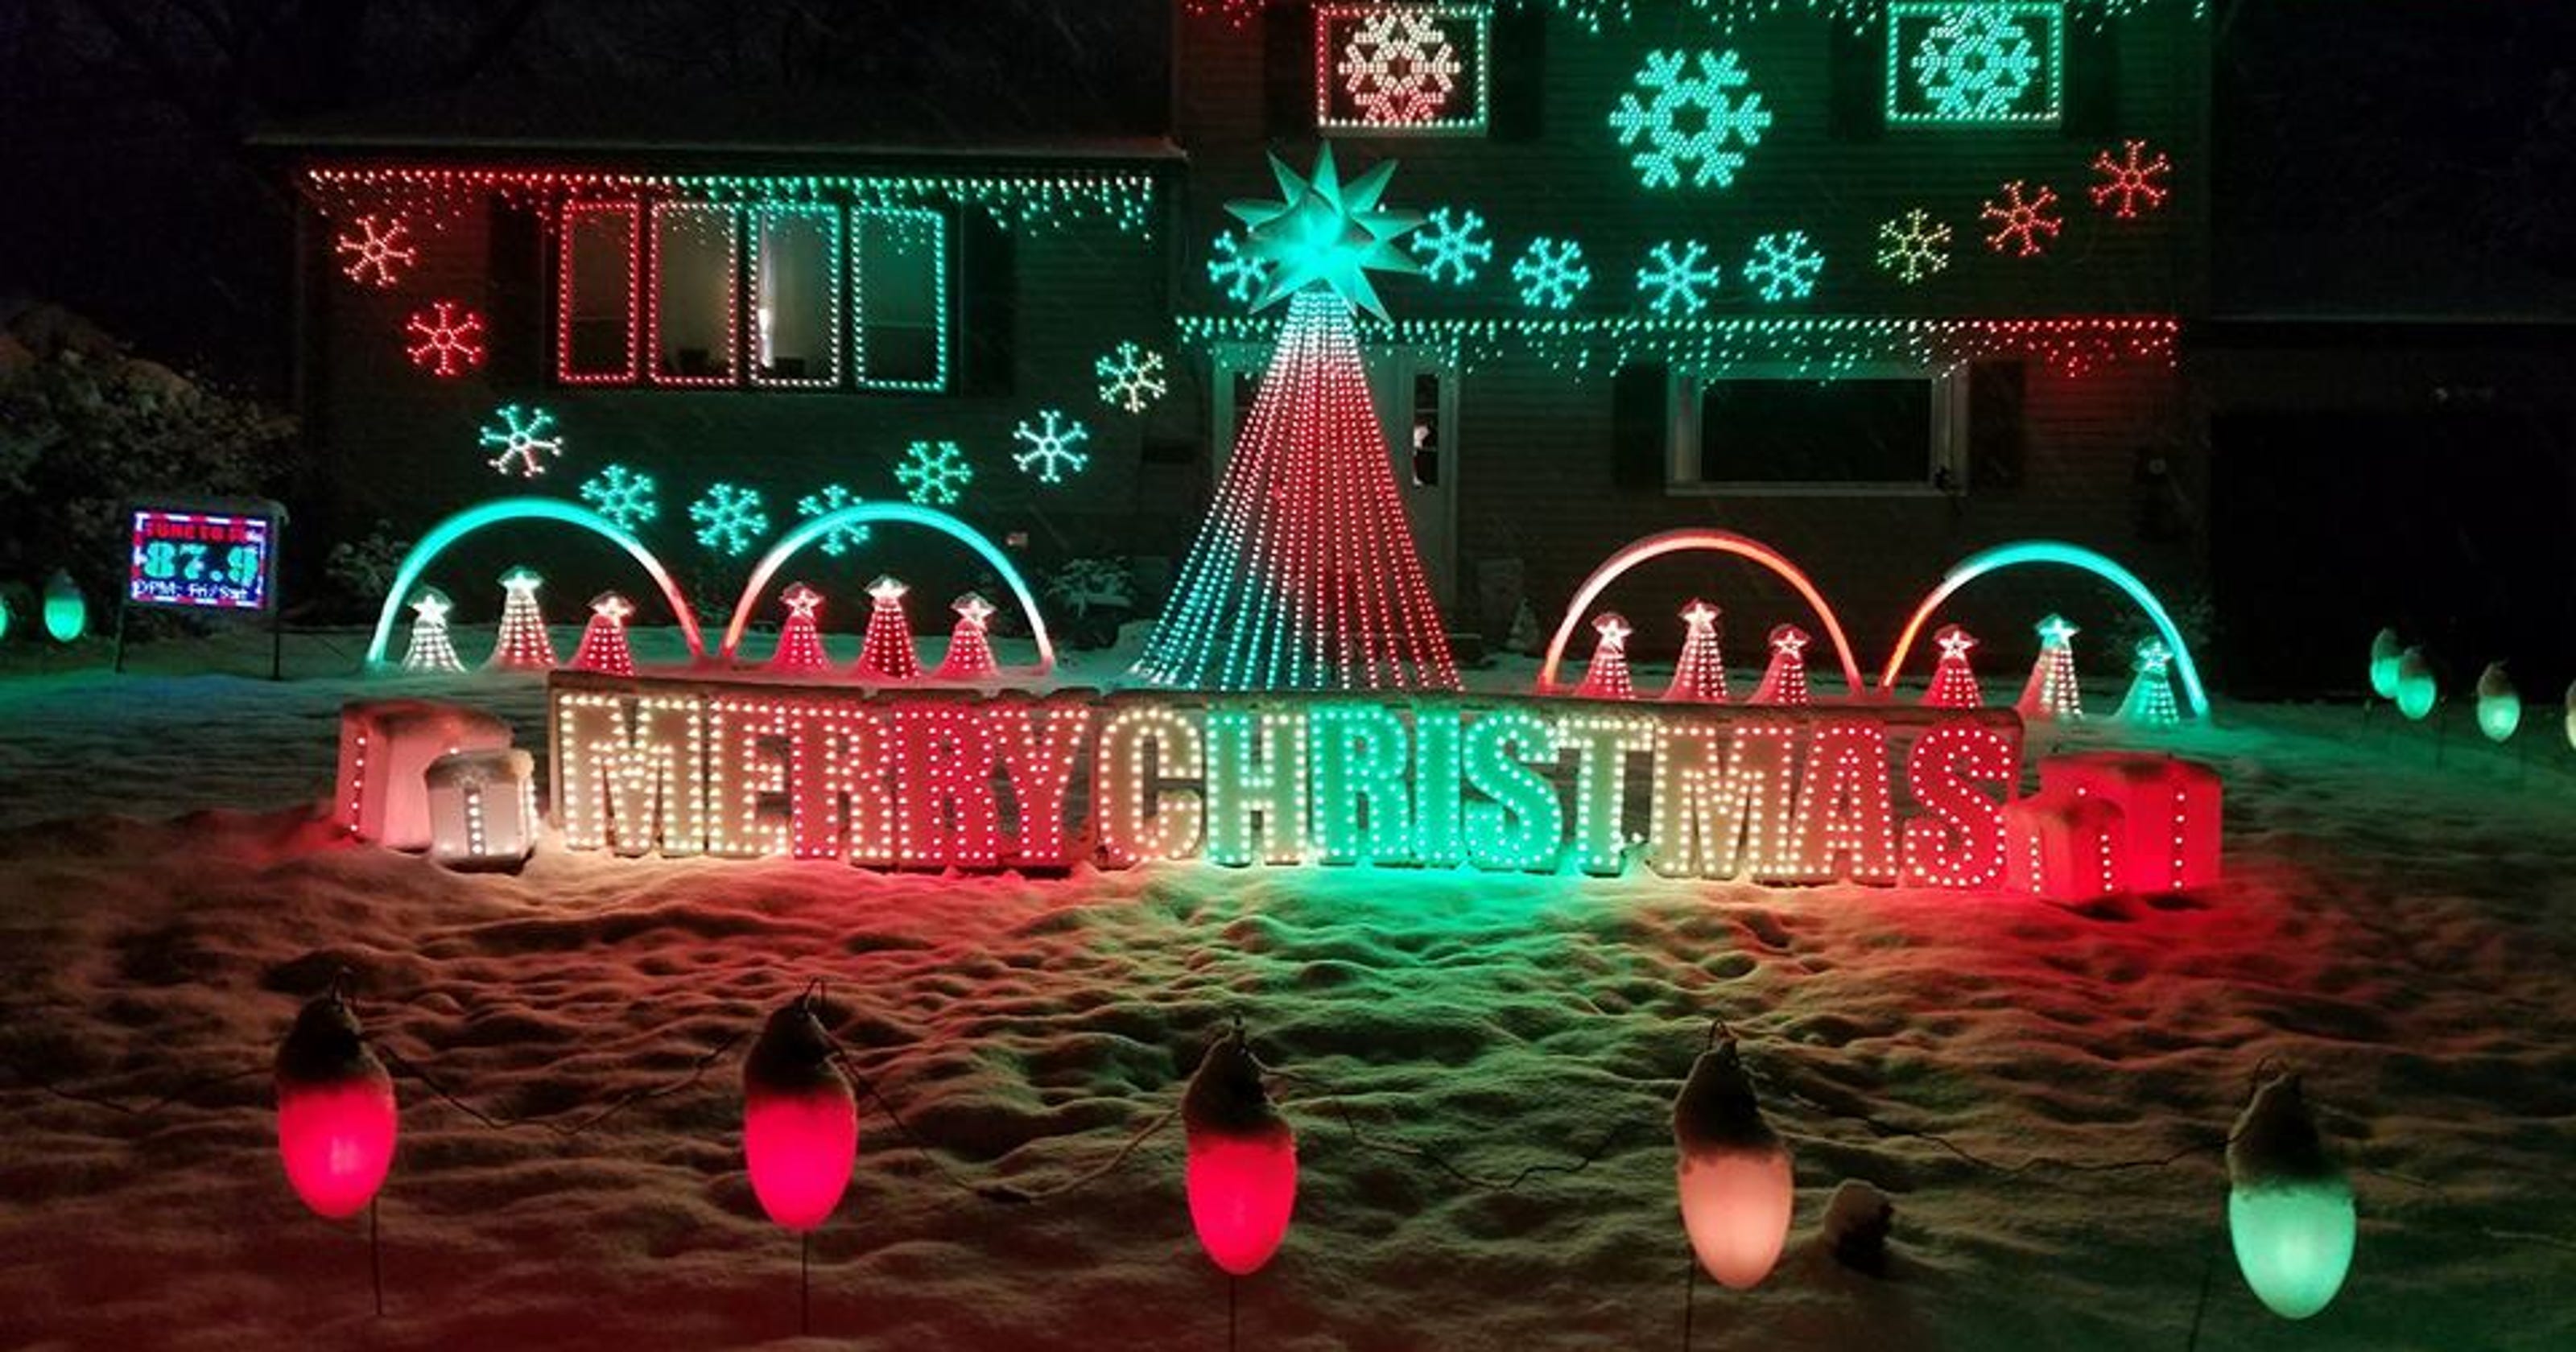 NJ Christmas lights Where to see the best, brightest home displays